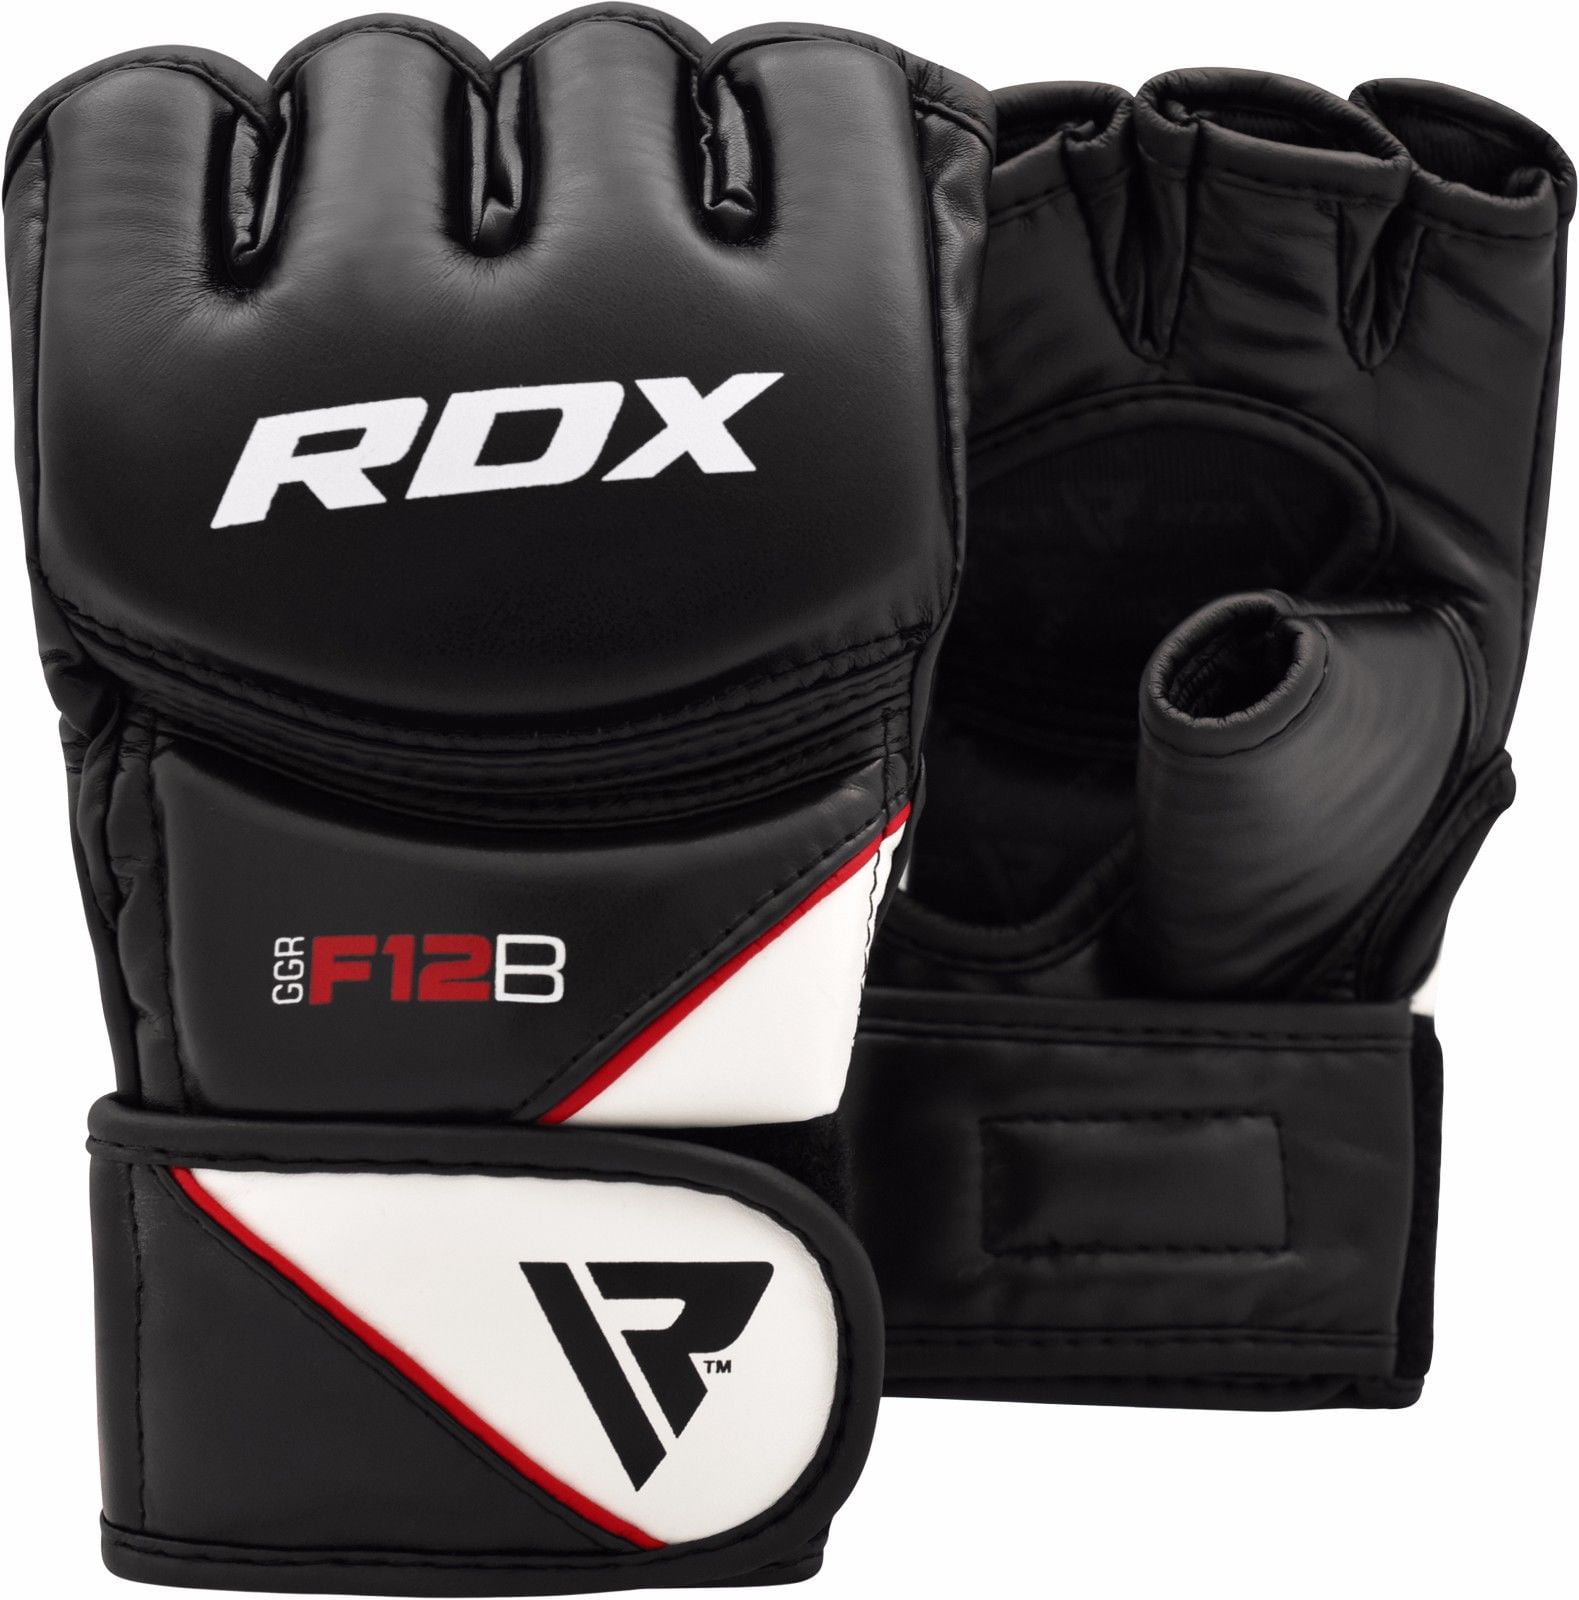 RDX MMA Gloves Sparring Training Fighting Grappling Combat Punching Bag Mitts US 